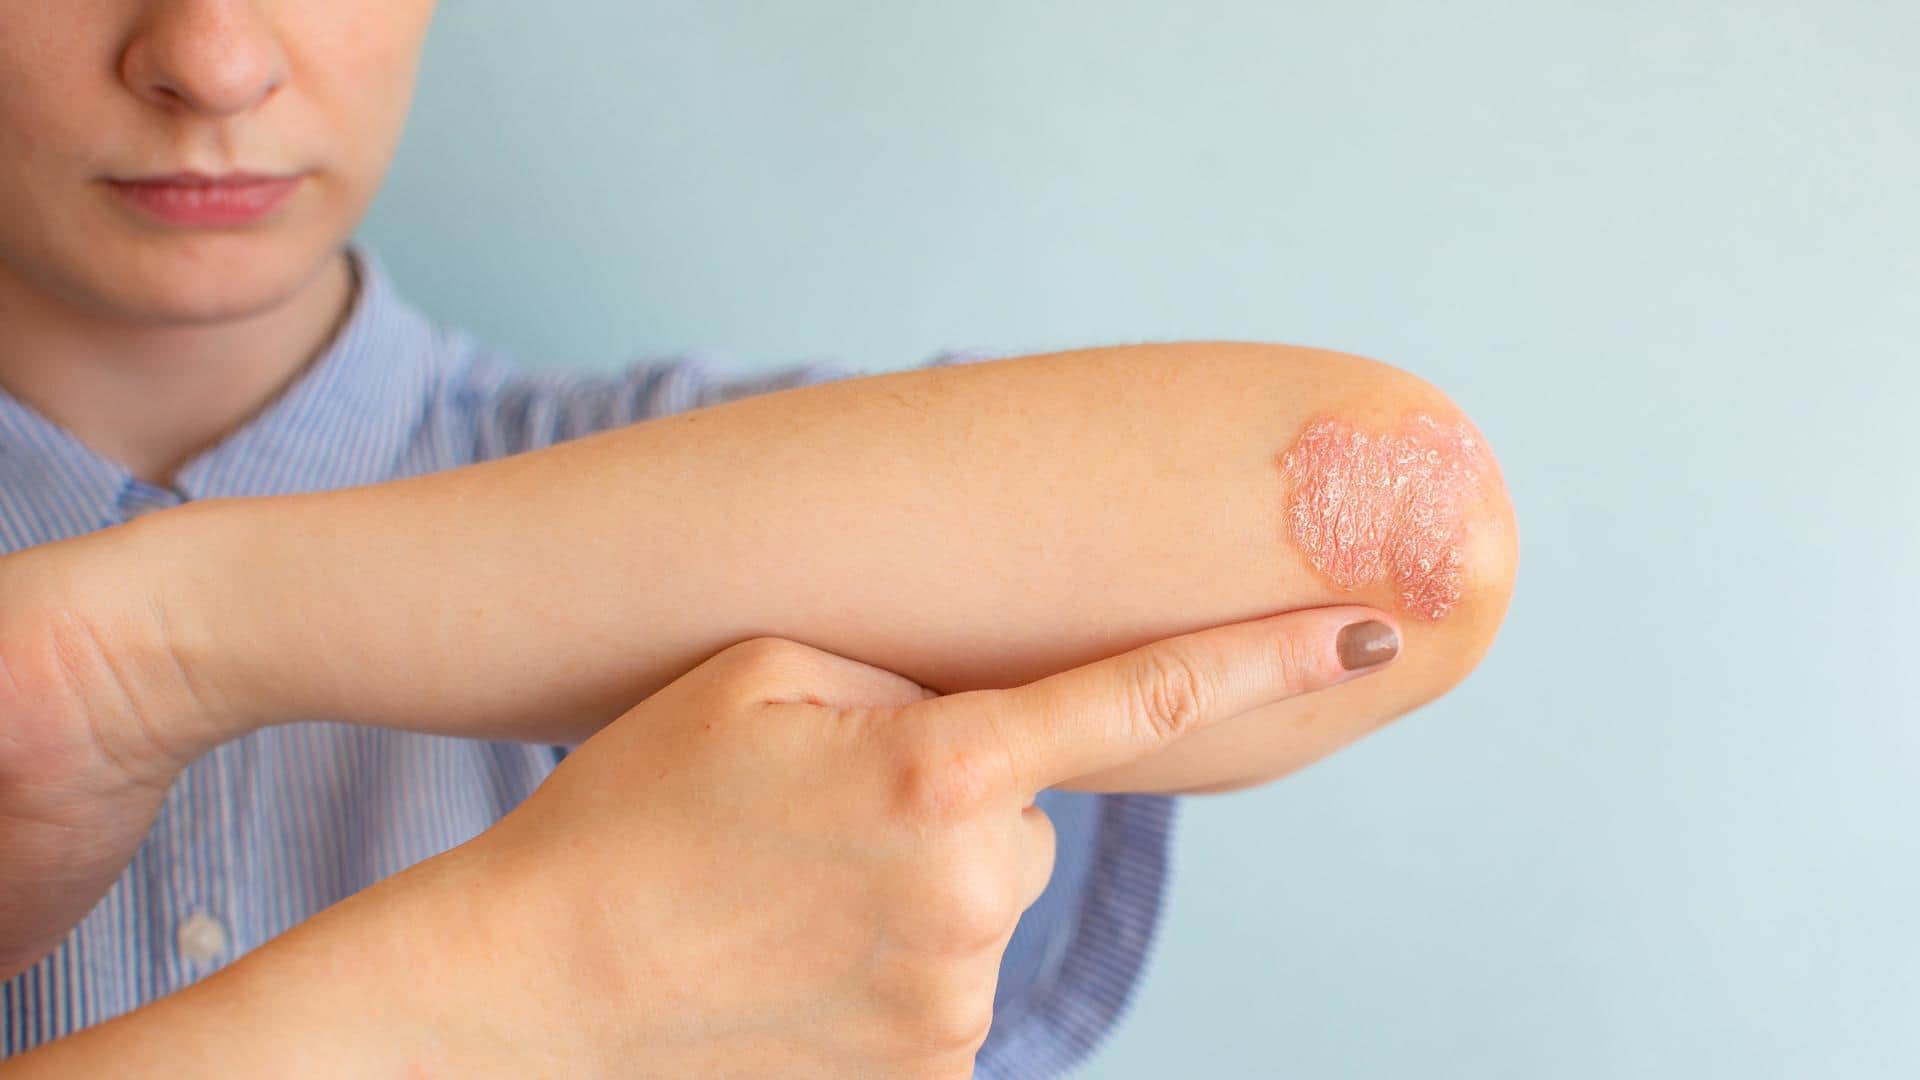 Home remedies for ringworm: How to treat this condition naturally